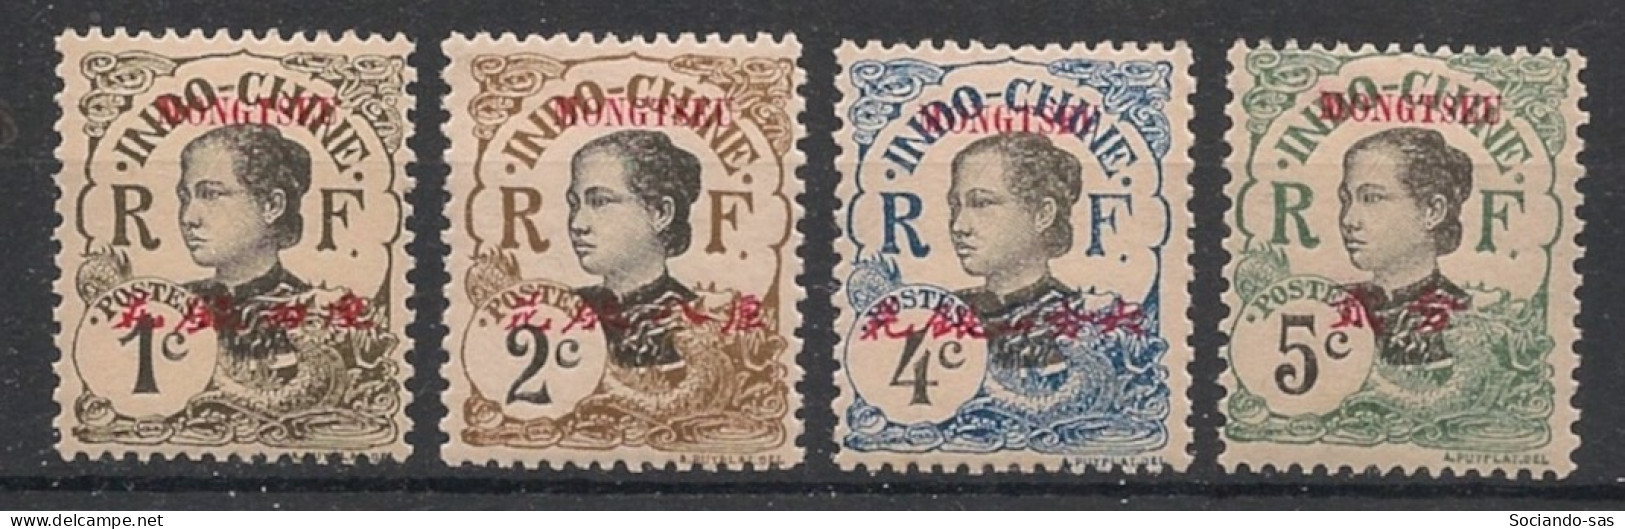 MONG-TZEU - 1908 - N°YT. 34A à 37 - Type Annamite 1c à 5c - Neuf Luxe ** / MNH / Postfrisch - Unused Stamps